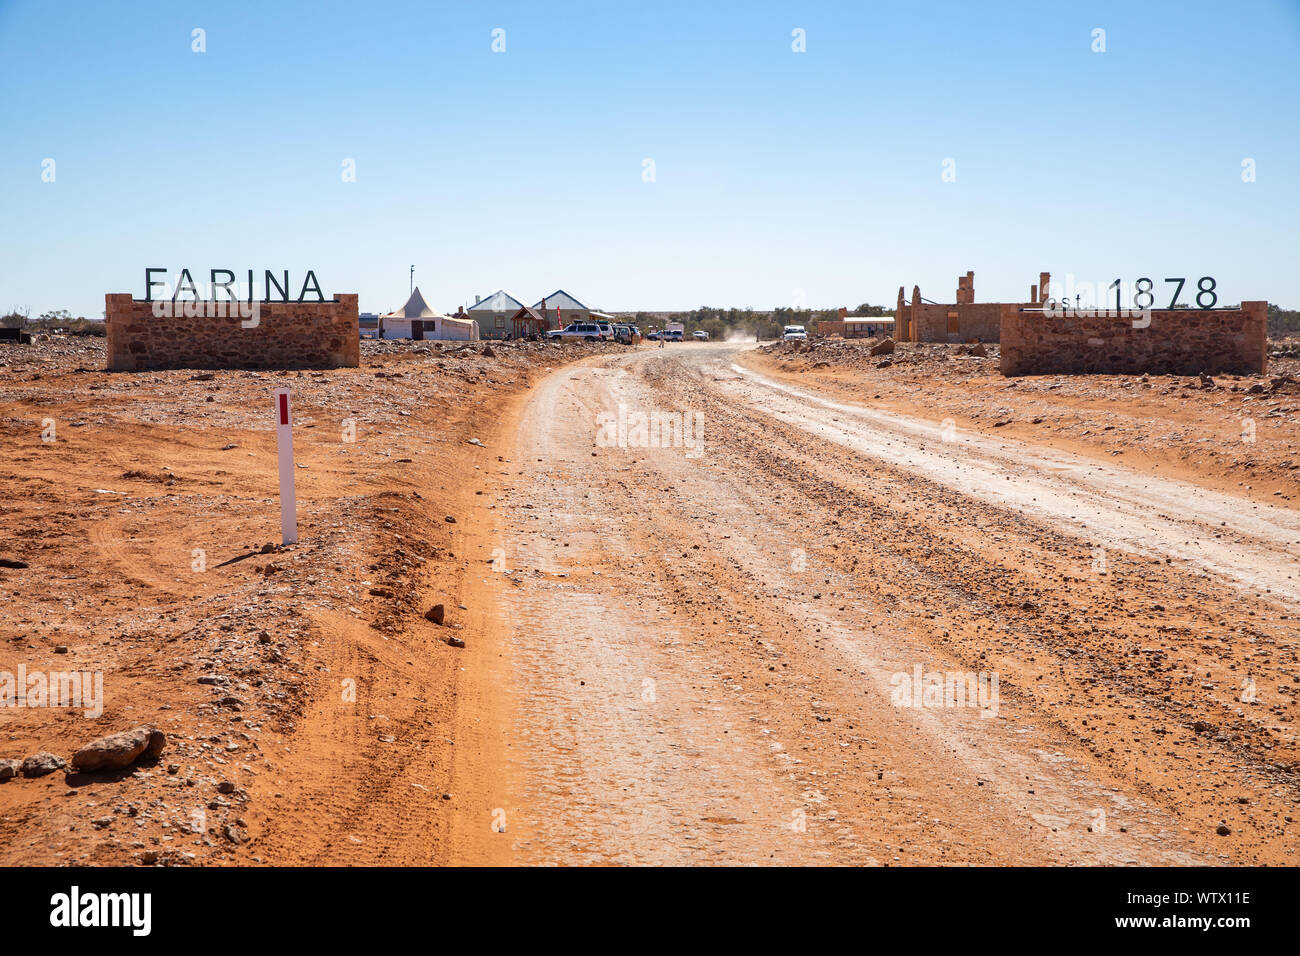 The deserted outback town of Farina, currently being partially restored by a team of volunteers Stock Photo